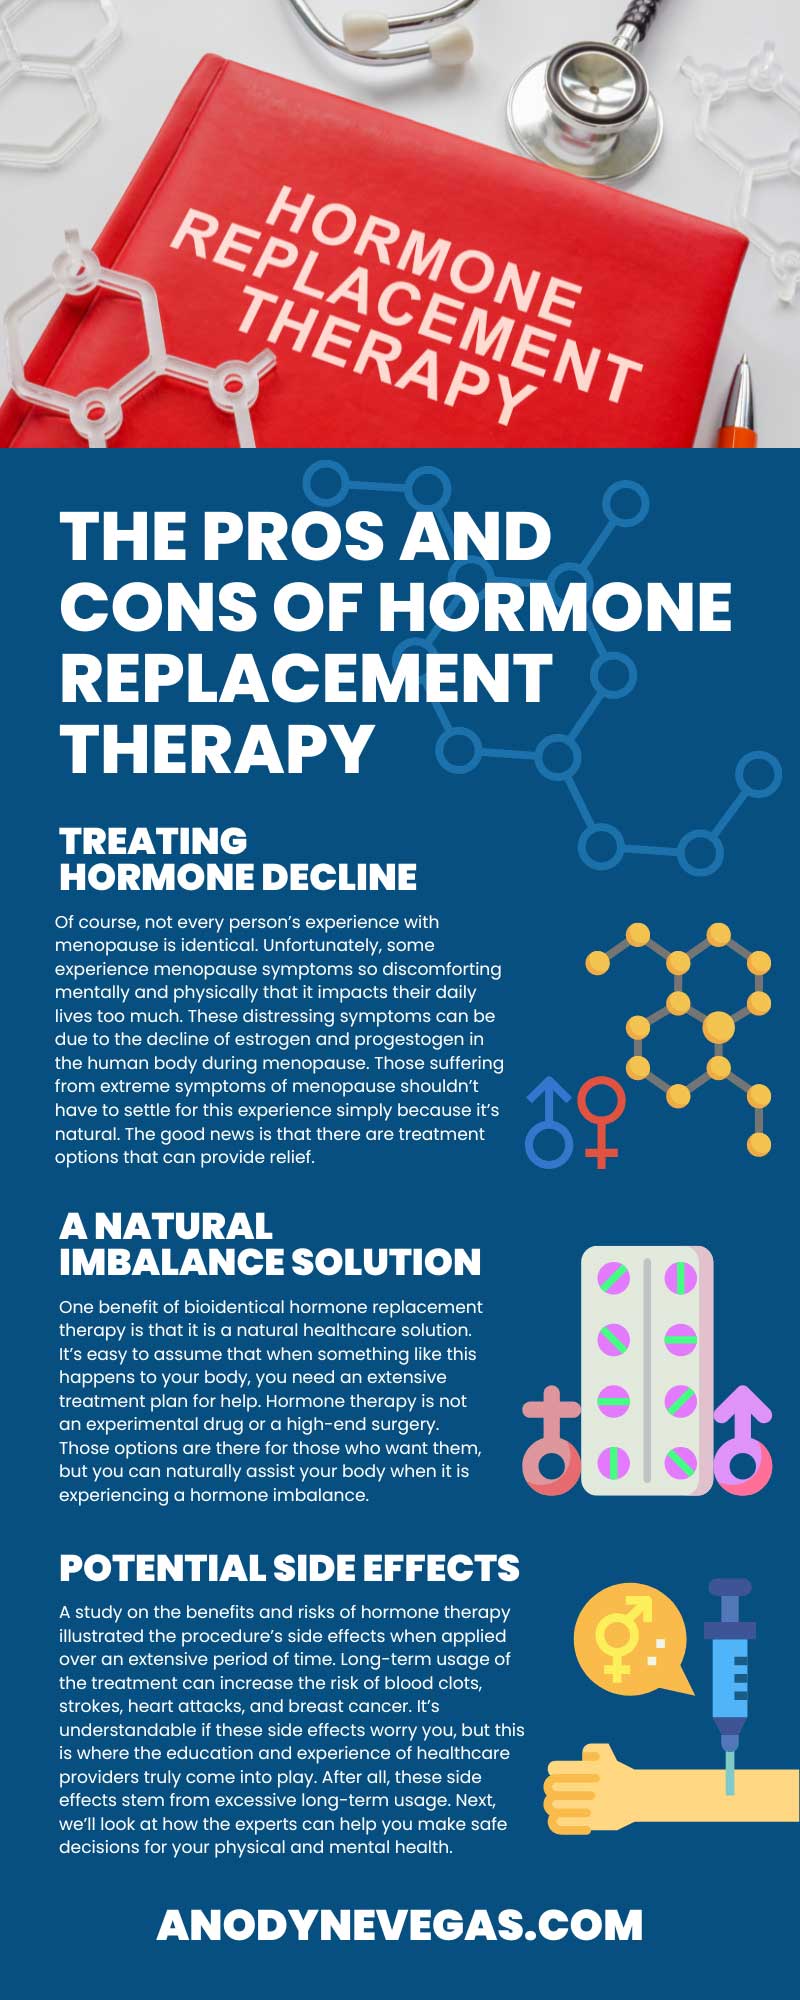 The Pros and Cons of Hormone Replacement Therapy
